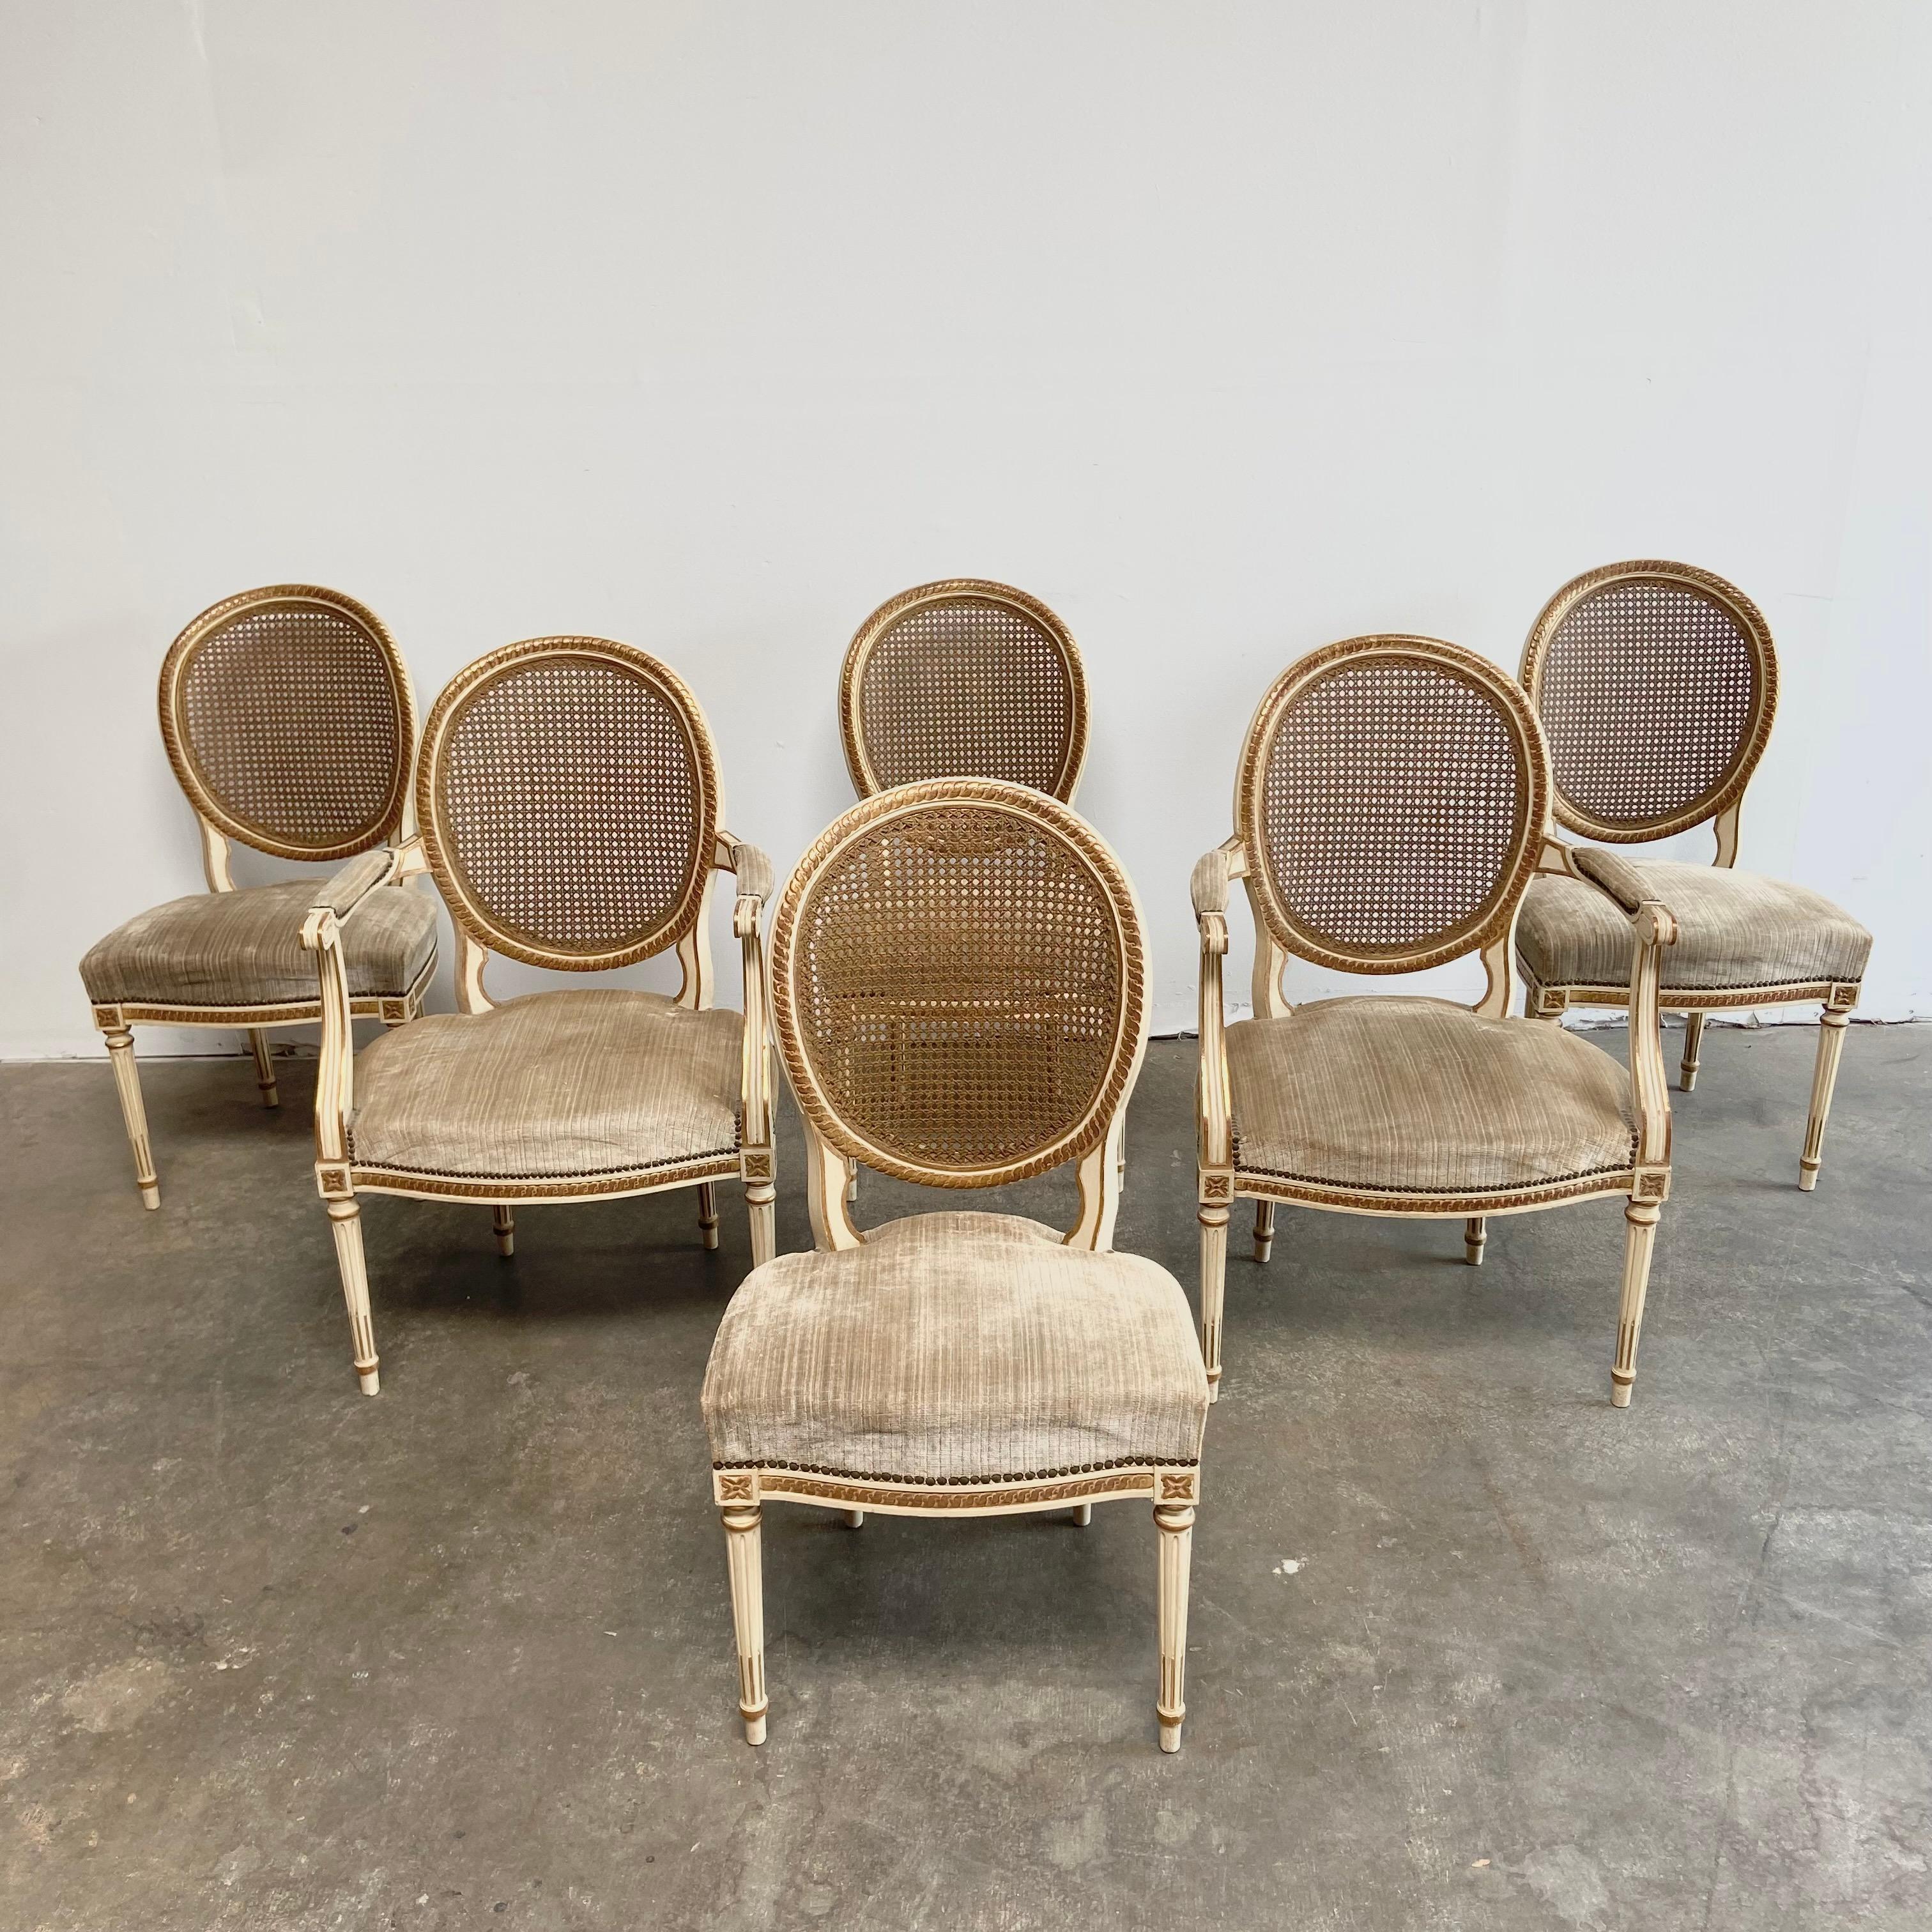 20th Century Set of 6 Antique French Style Cane Back Dining Chairs For Sale